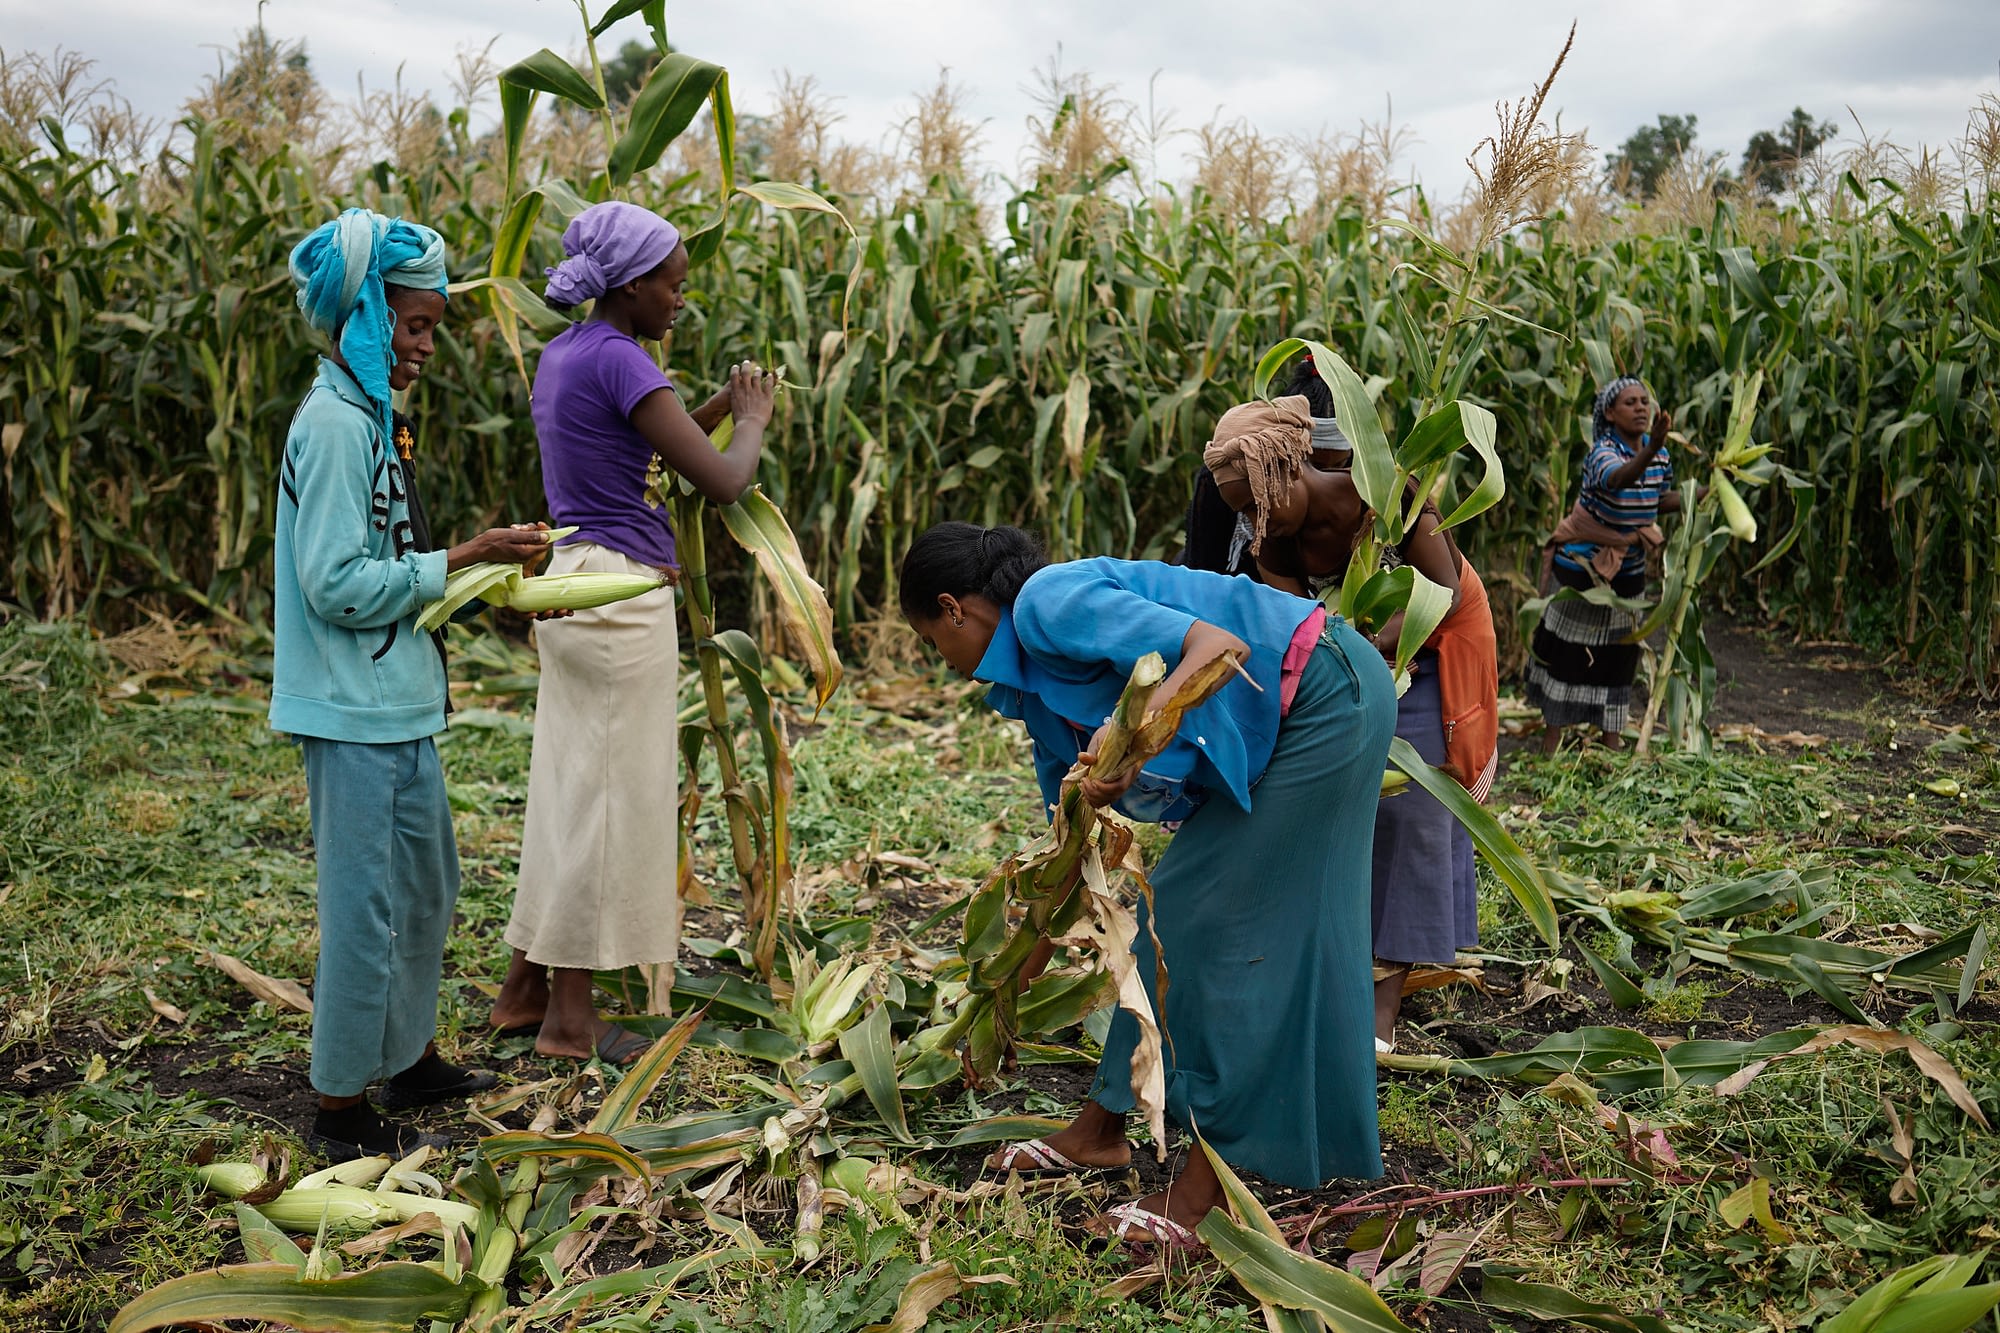 Workers harvesting green maize at Ambo Research Center, Ethiopia, 2015. (Photo: CIMMYT/ Peter Lowe)